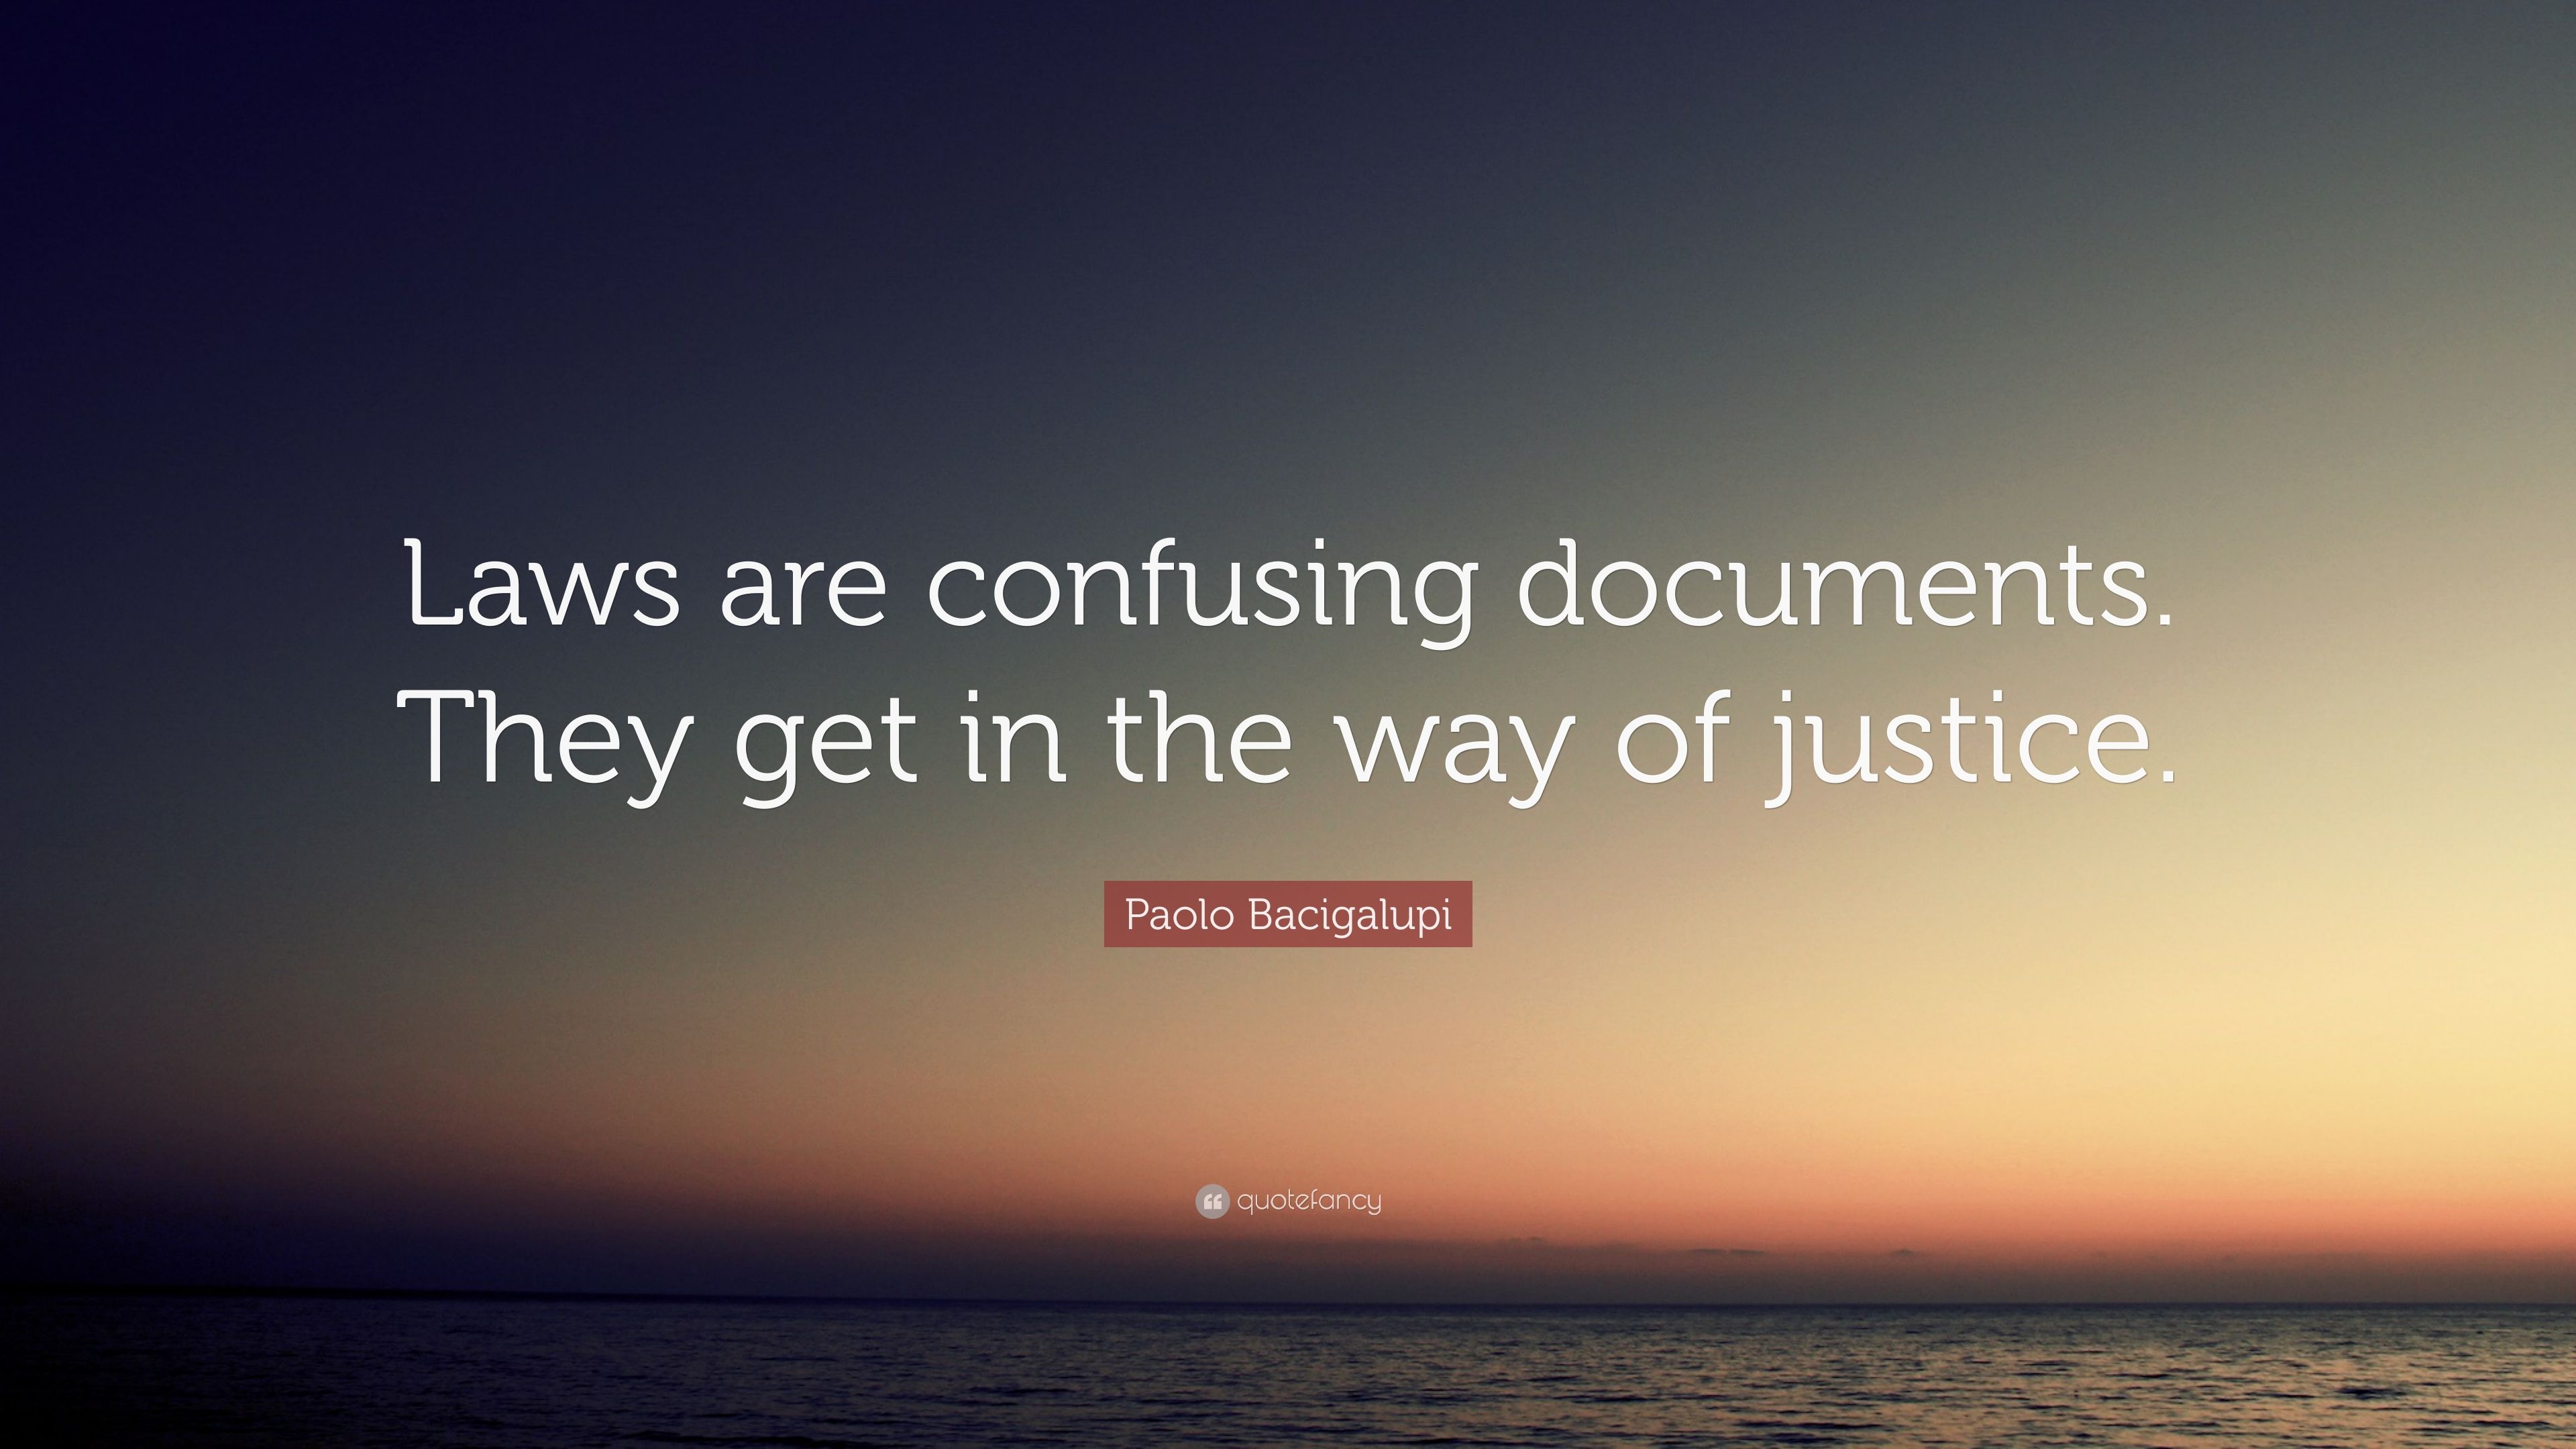 Paolo Bacigalupi Quote: “Laws are confusing documents. They get in the way of justice.” (7 wallpaper)